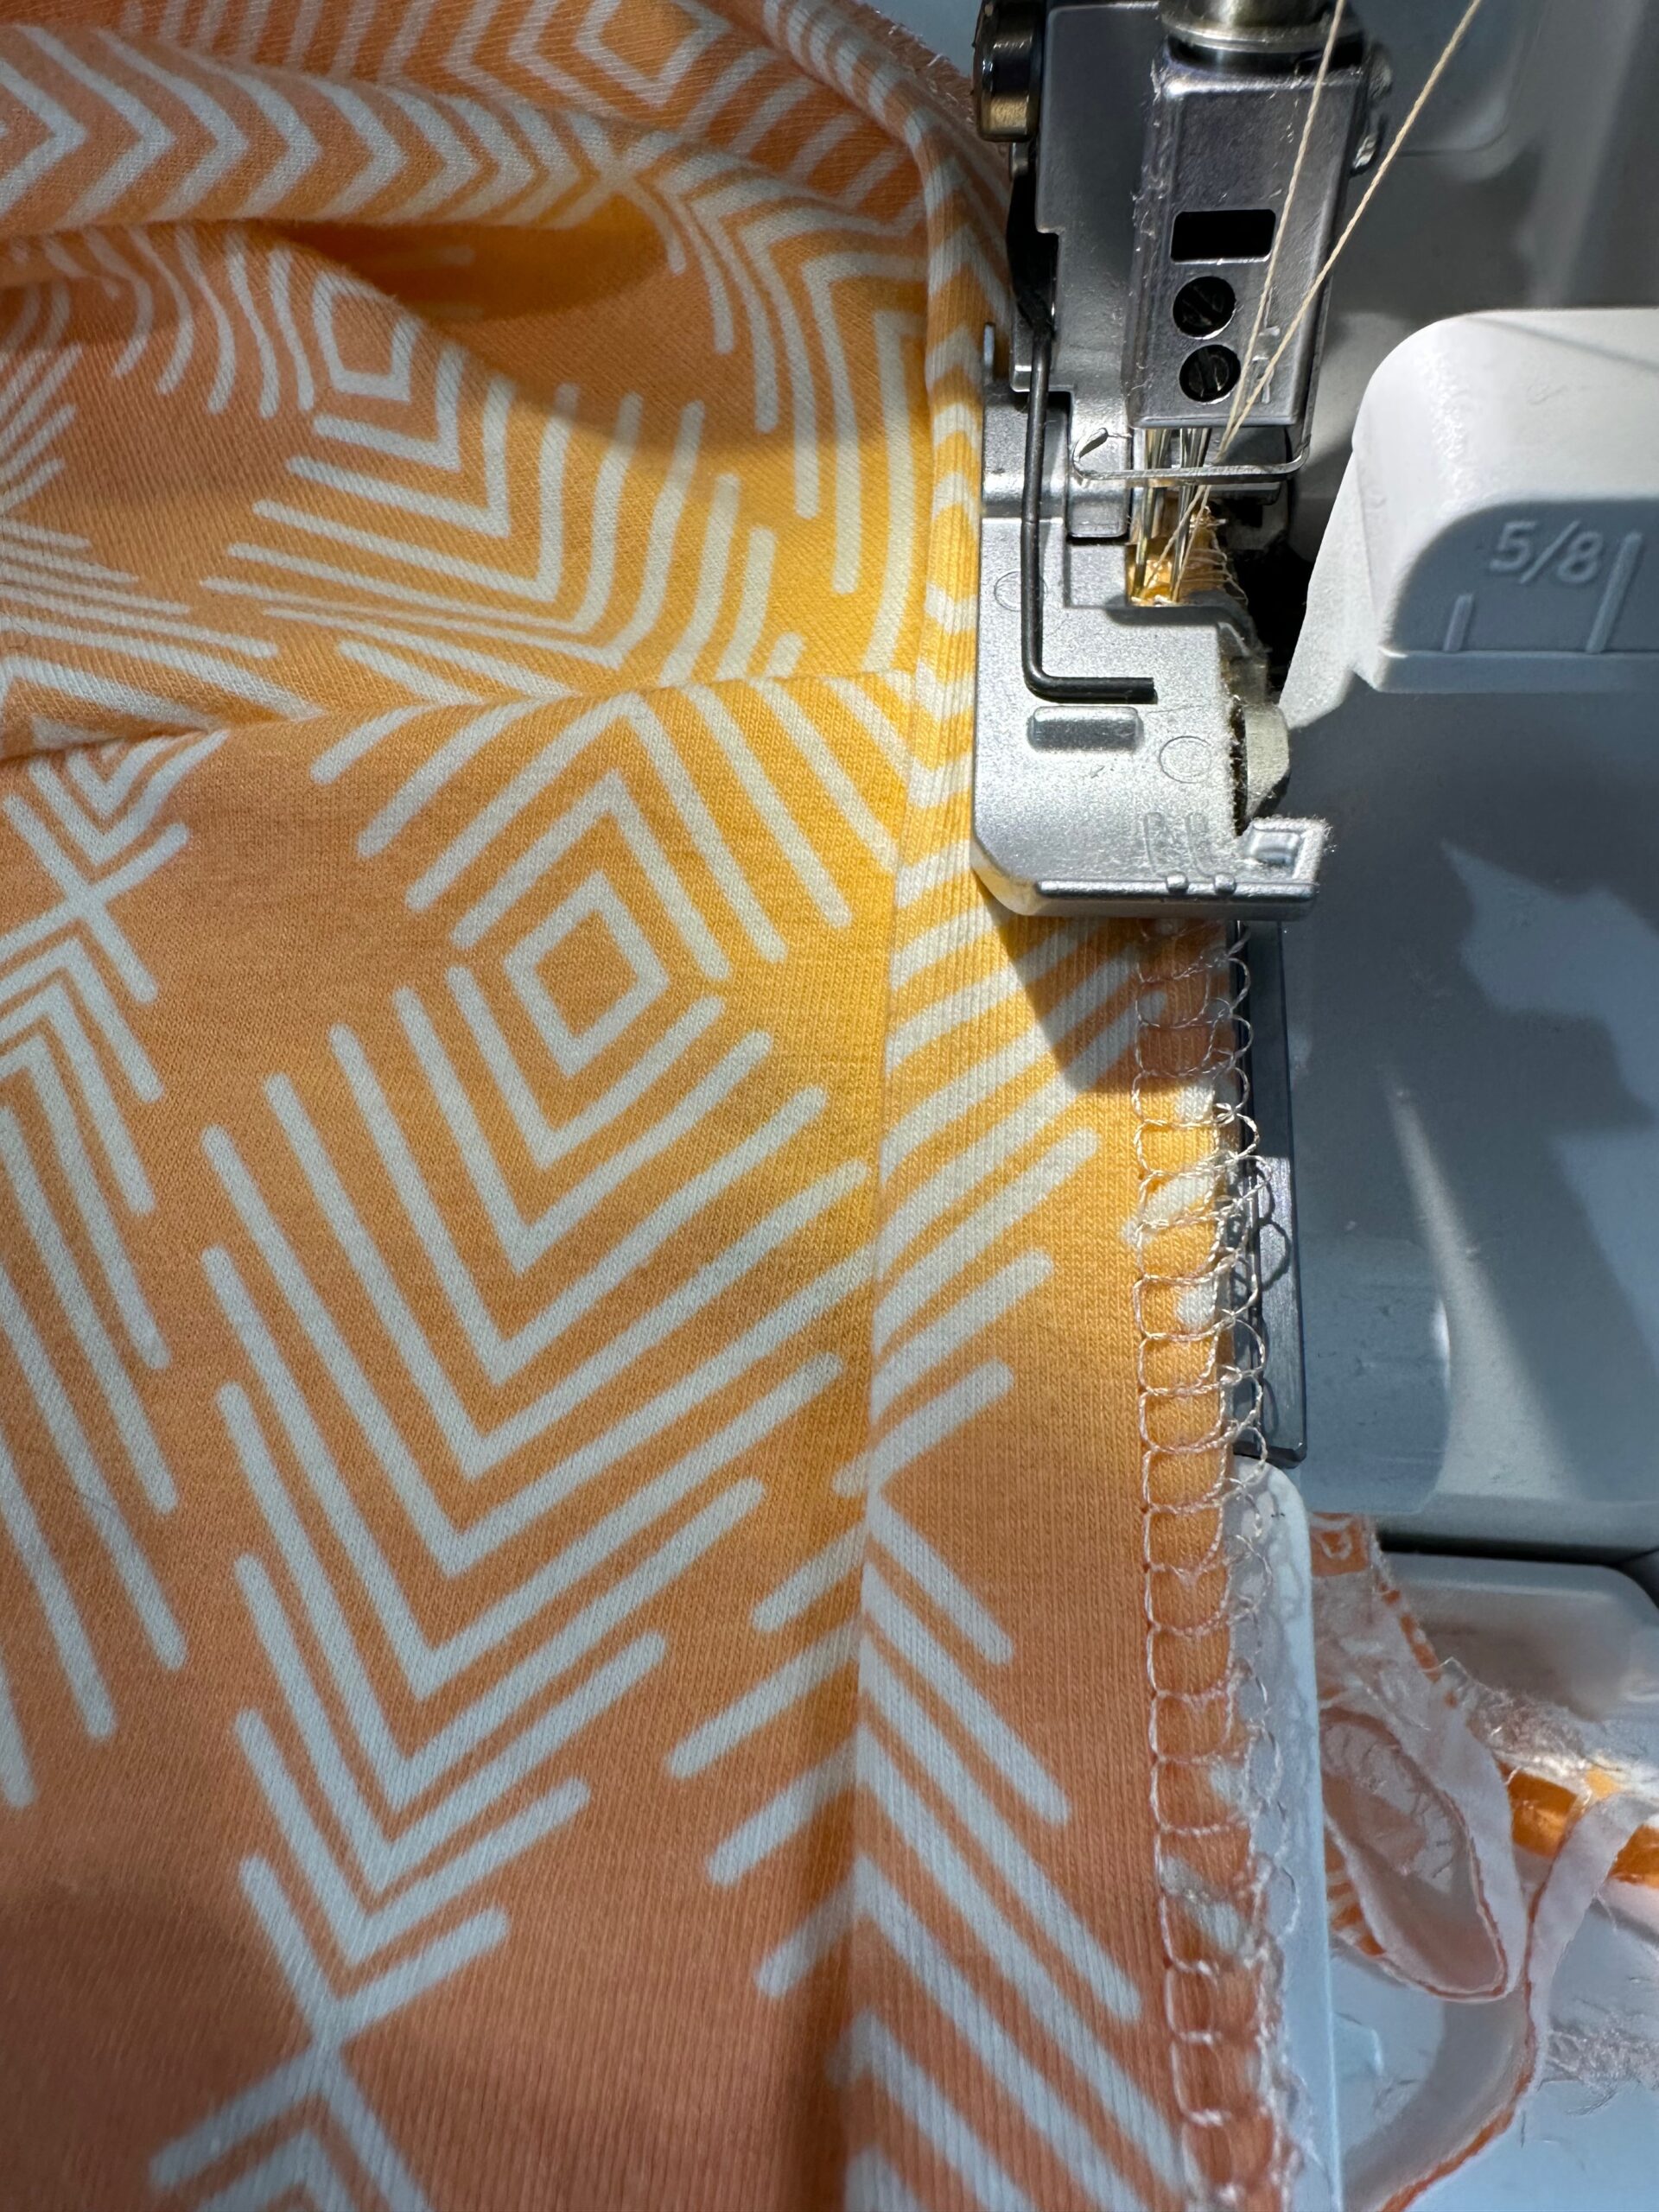 Sewing Stretch Fabrics with Sulky - Sulky